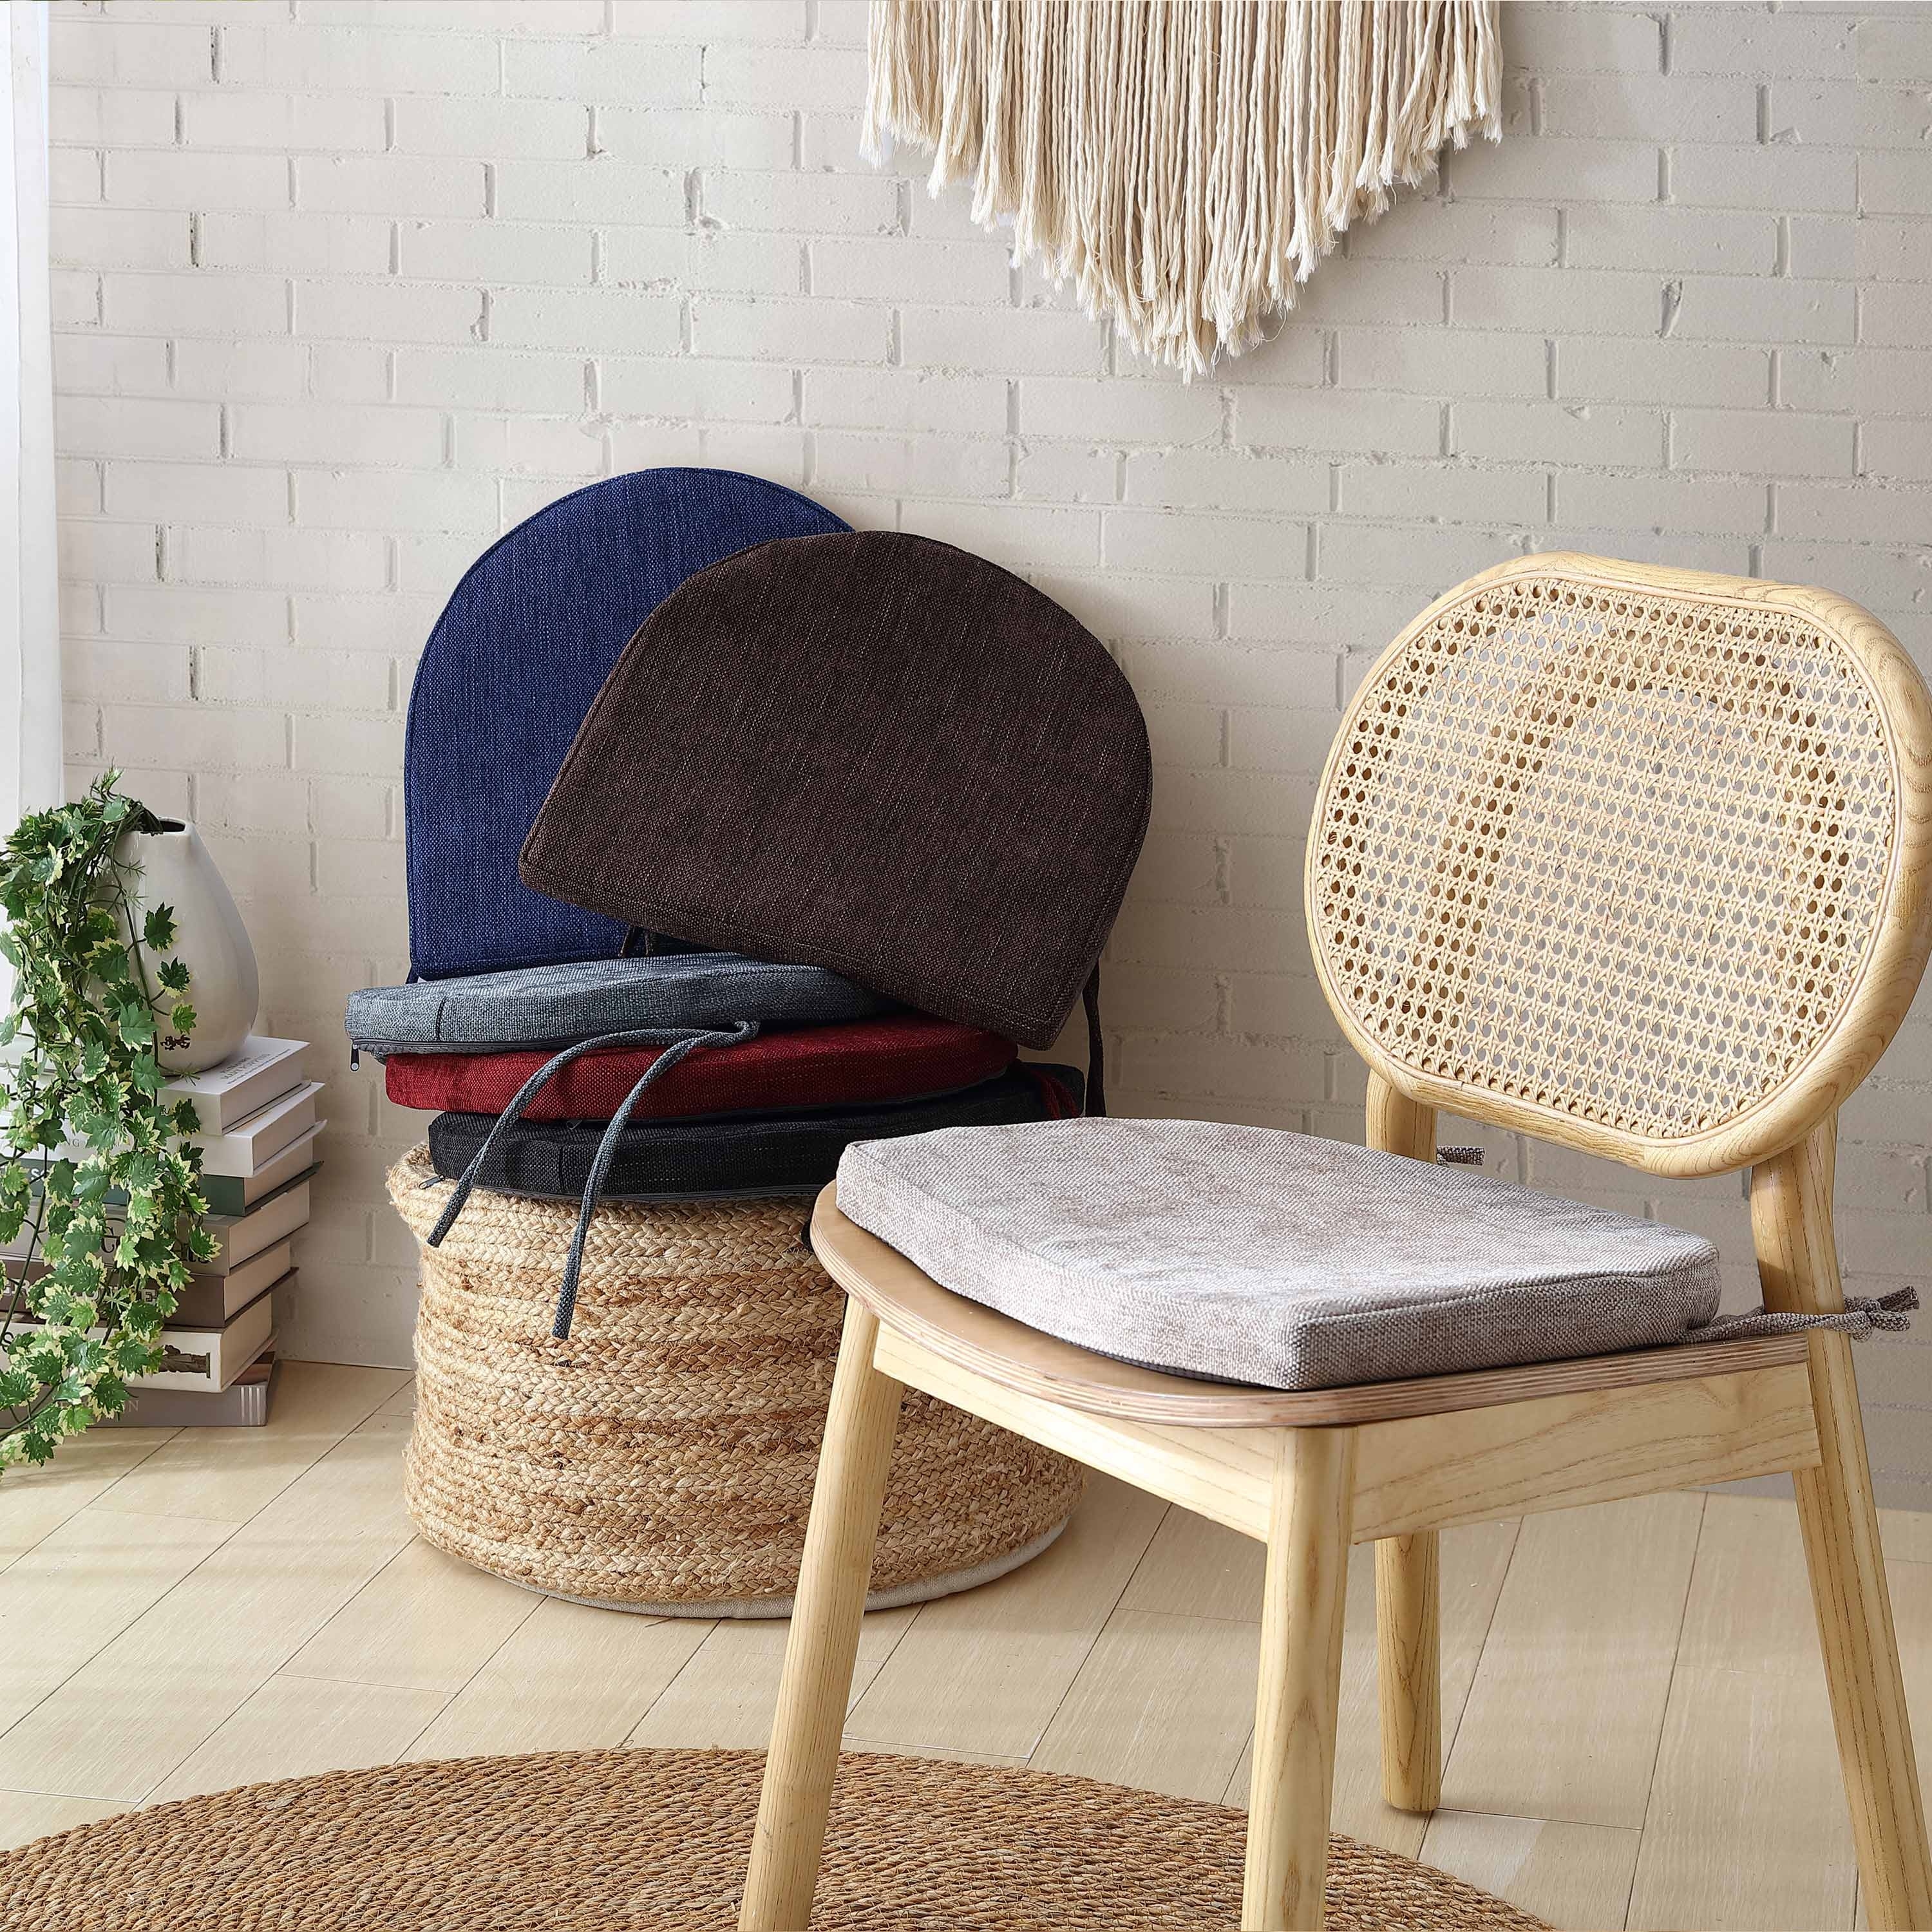 https://ak1.ostkcdn.com/images/products/is/images/direct/37c0537c76e7afa9a16ce1e035490a0effb60c05/Sweet-Home-Collection-U-Shape-Molded-Memory-Foam-Chair-Pads-With-Ties.jpg